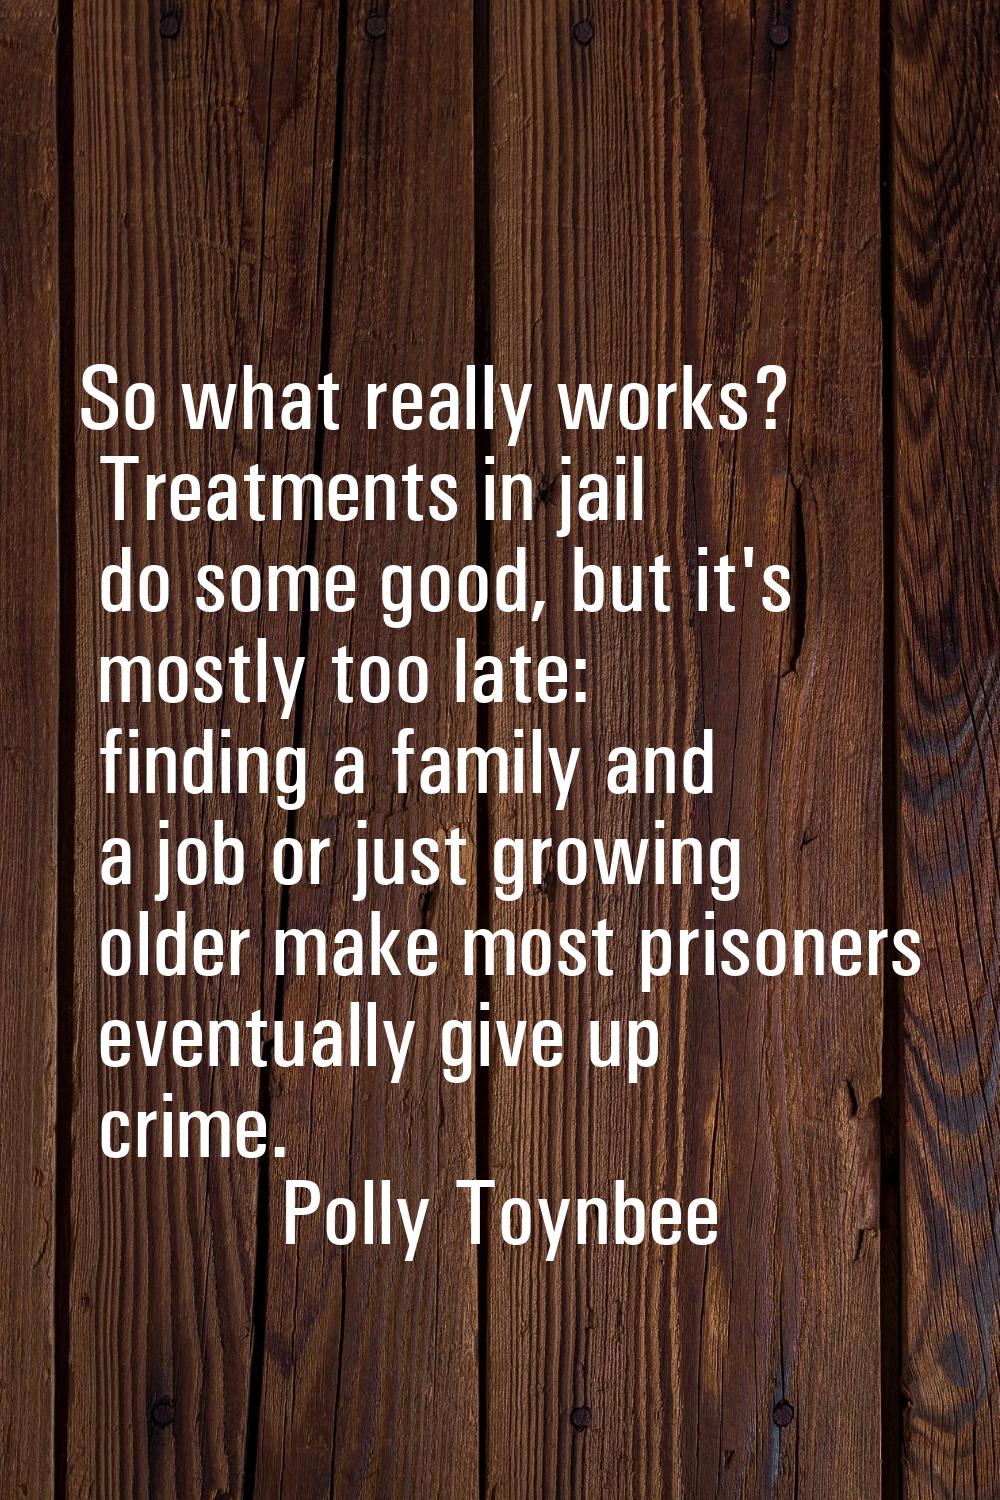 So what really works? Treatments in jail do some good, but it's mostly too late: finding a family a